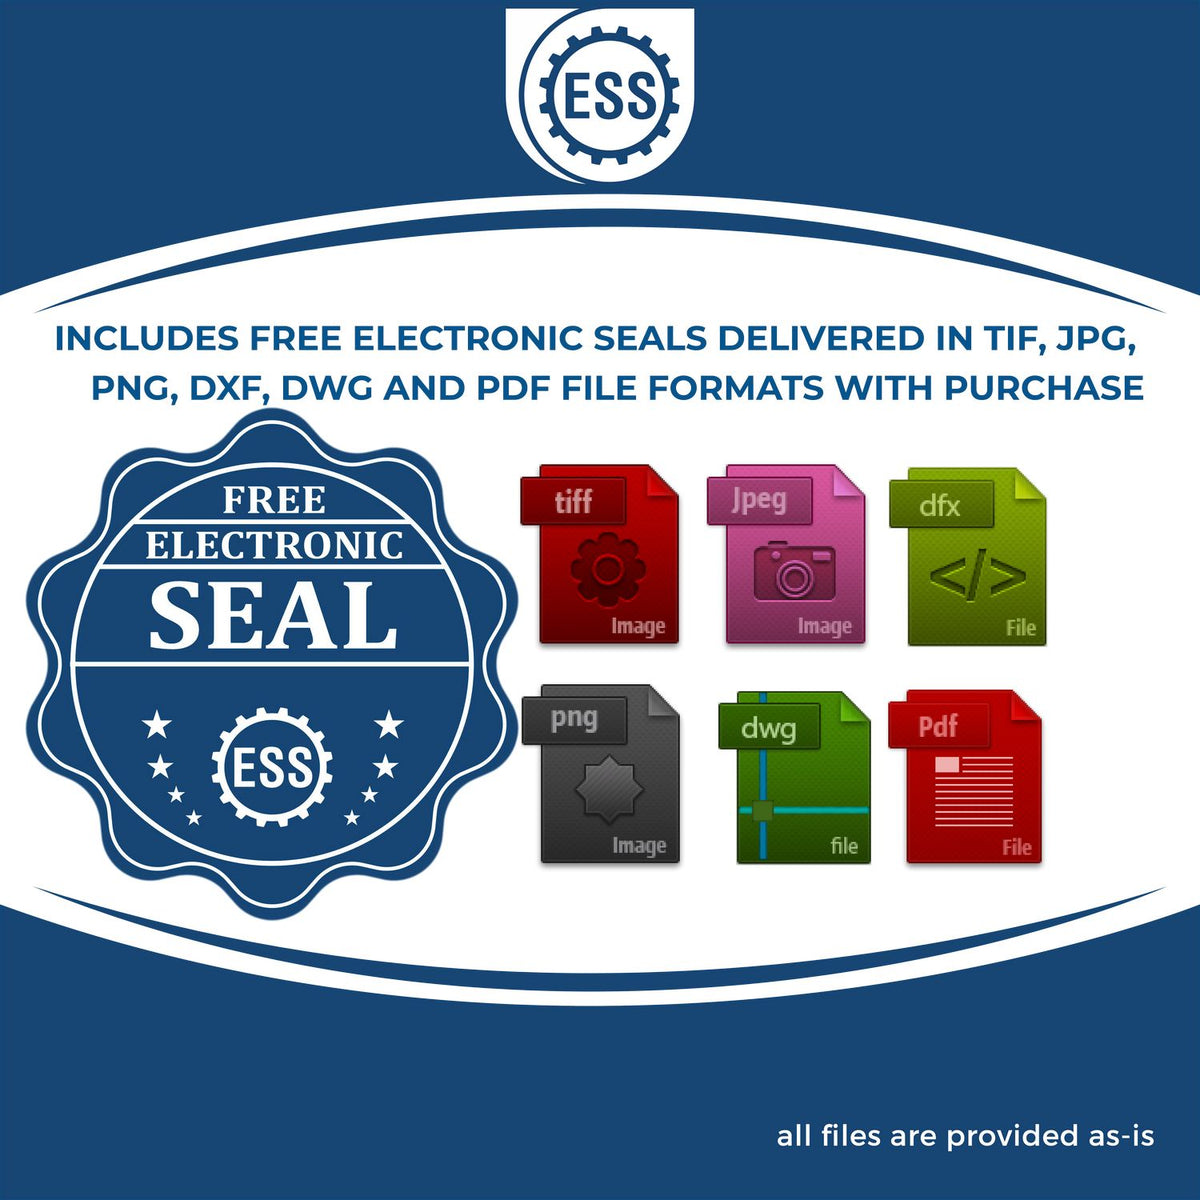 An infographic for the free electronic seal for the Vermont Engineer Desk Seal illustrating the different file type icons such as DXF, DWG, TIF, JPG and PNG.